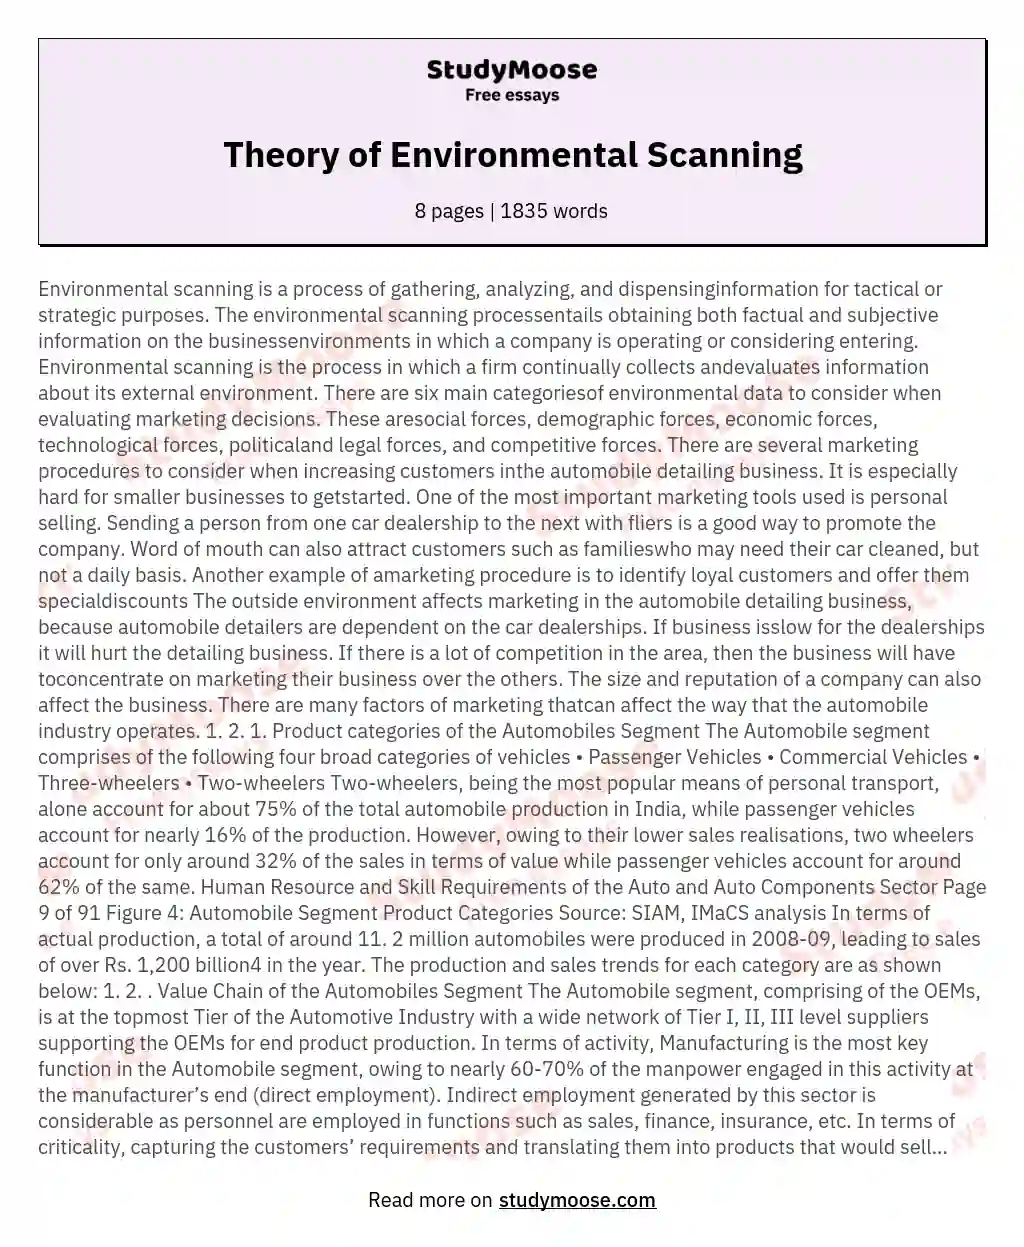 Theory of Environmental Scanning essay